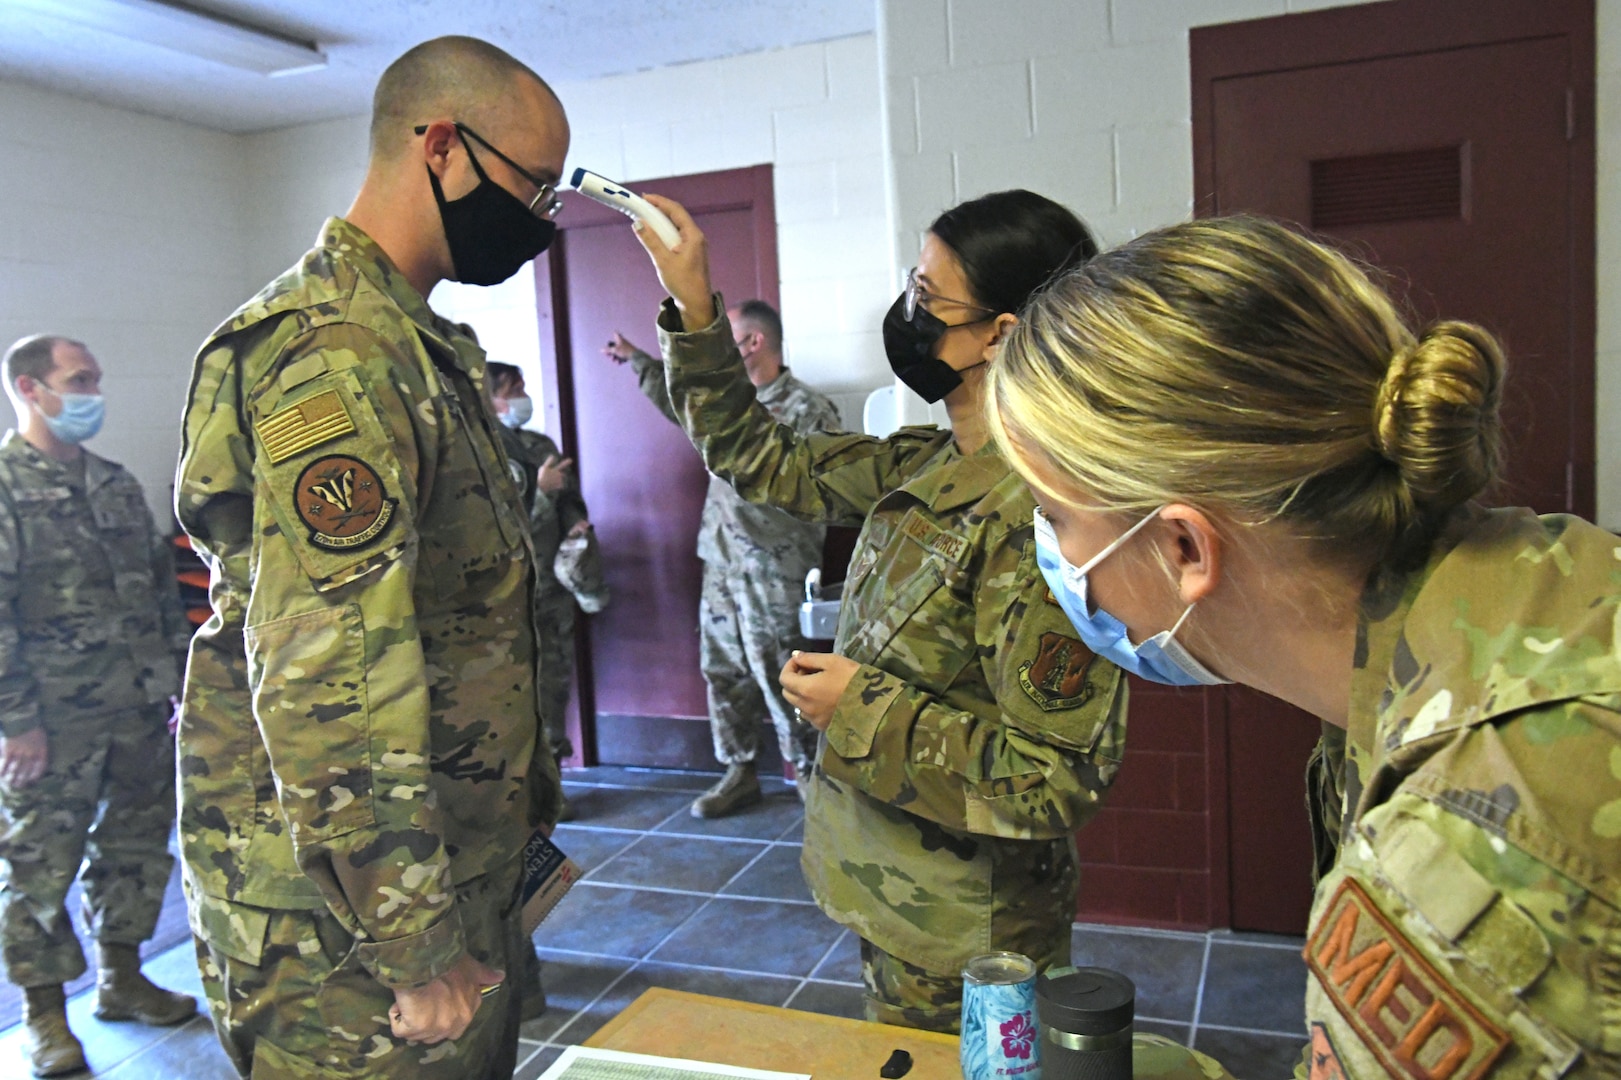 Oregon National Guard Tech. Sgt. Meghan Olson, 173rd Medical Group, checks the temperature of Senior Master Sgt. John Wyman, 270th Air Traffic Control Squadron, while Capt. Jaimie Nealy reviews his paperwork during an inprocessing briefing for Airmen activated to support hospitals across Oregon Sept. 2, 2021, at Kingsley Field in Klamath Falls, Oregon.